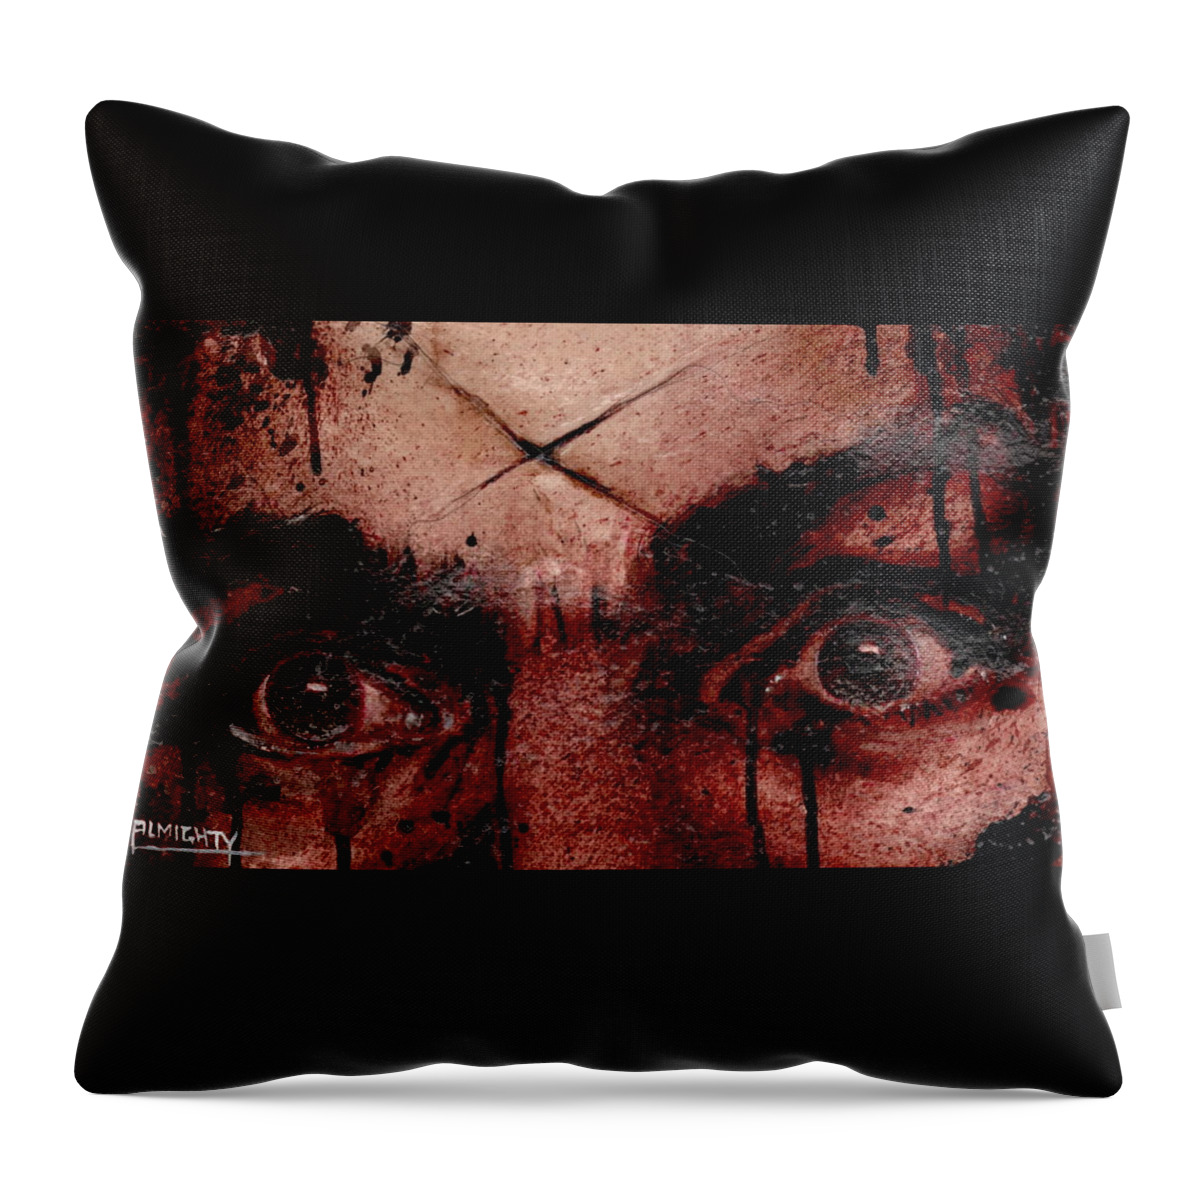 Ryan Almighty Throw Pillow featuring the painting CHARLES MANSONS EYES dry blood by Ryan Almighty